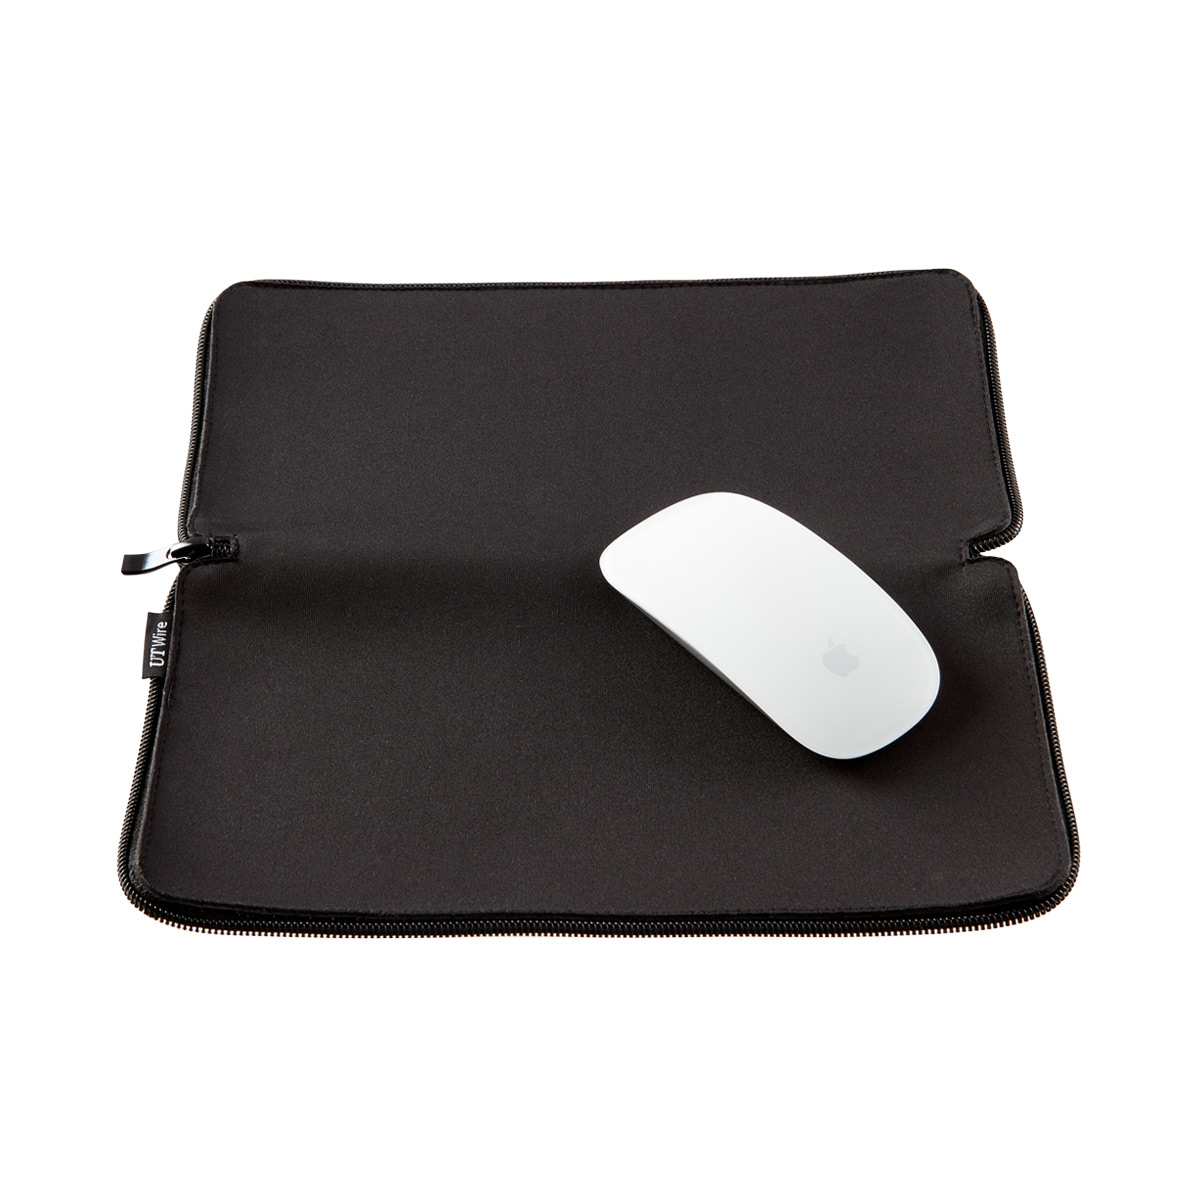 2-in-1 Laptop Accessories Pouch & Mousepad | The Container Store